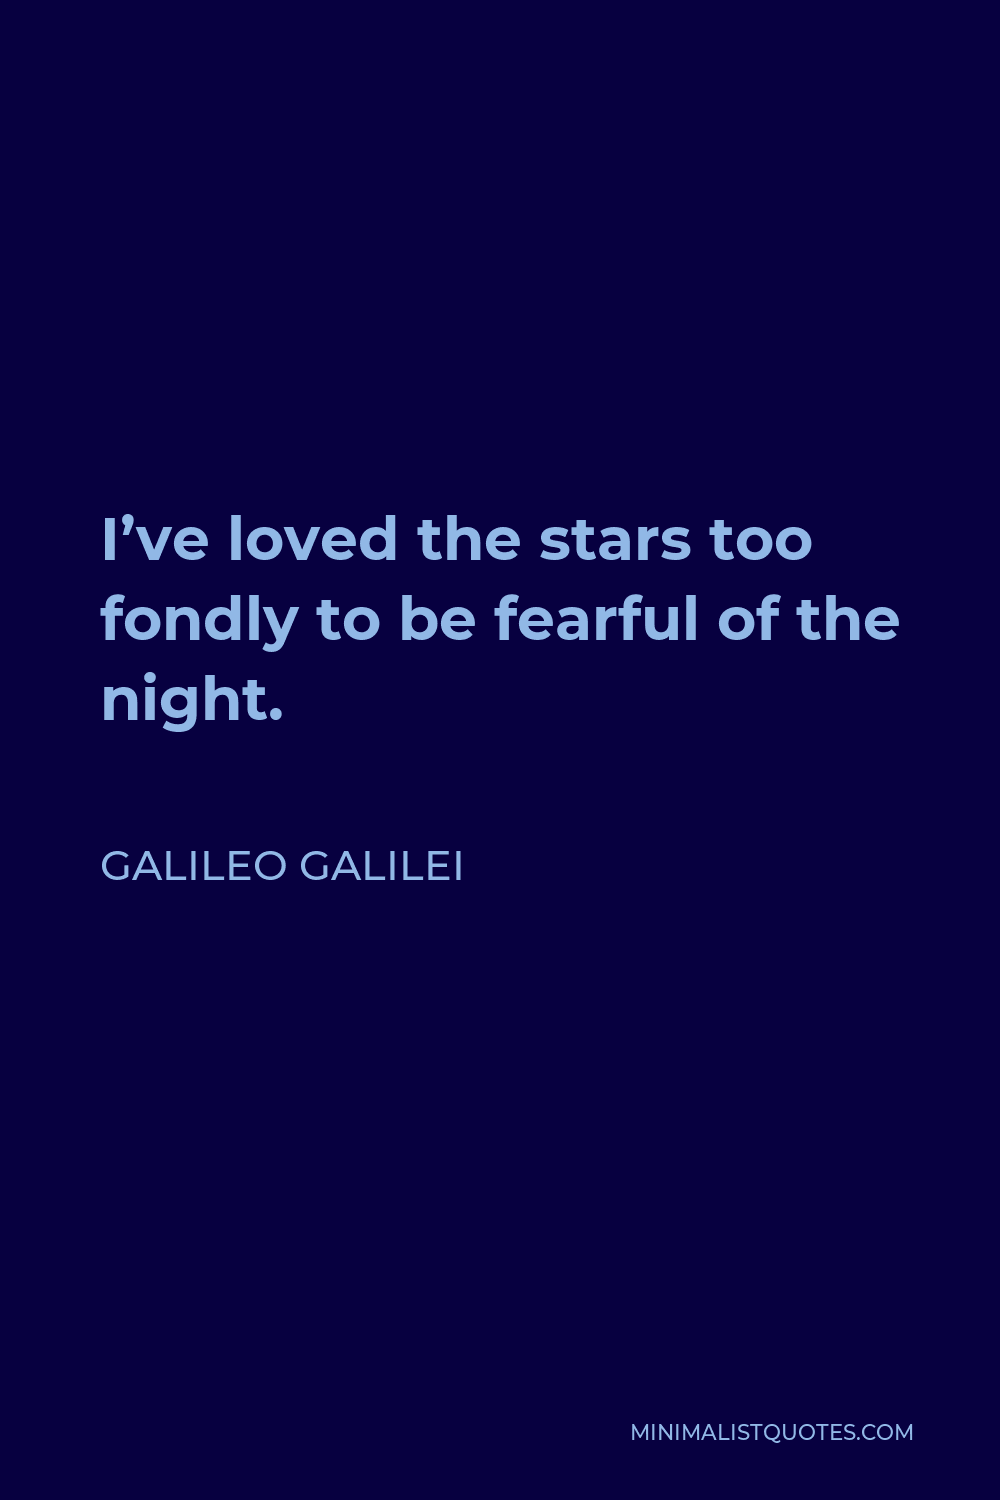 Galileo Galilei Quote - I’ve loved the stars too fondly to be fearful of the night.